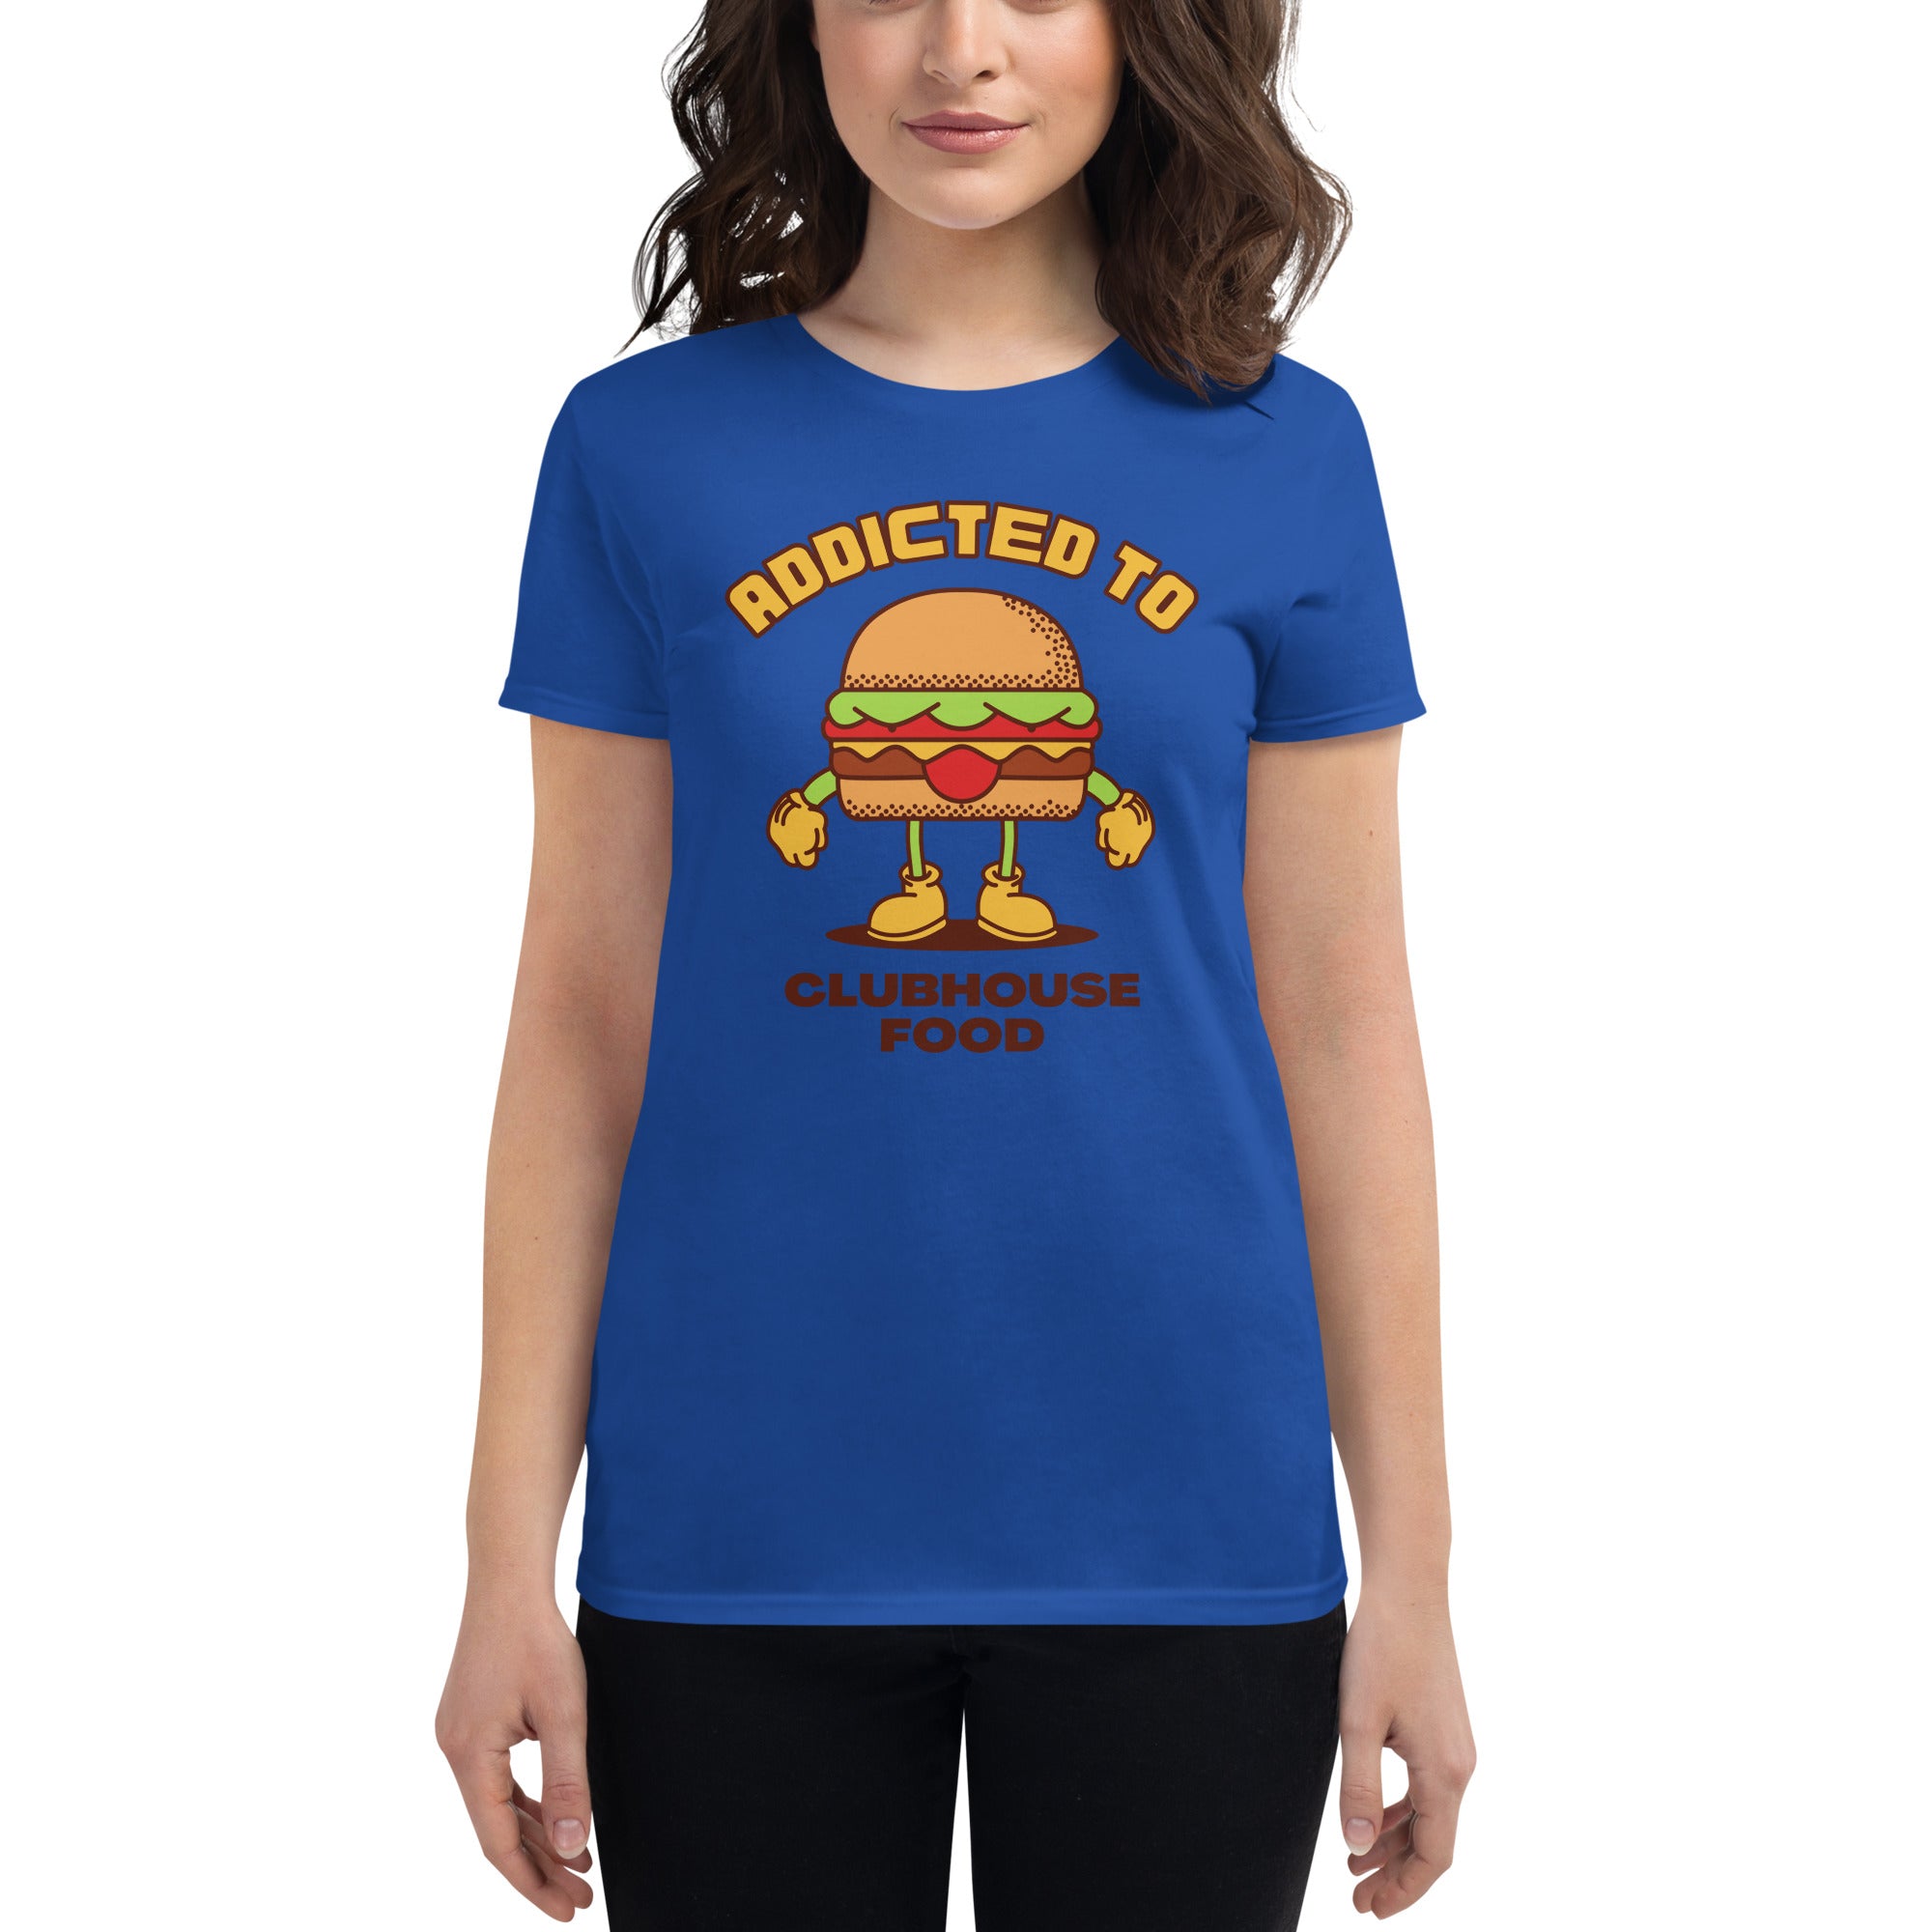 Addicted To Clubhouse Food Women's Fitted T-Shirt